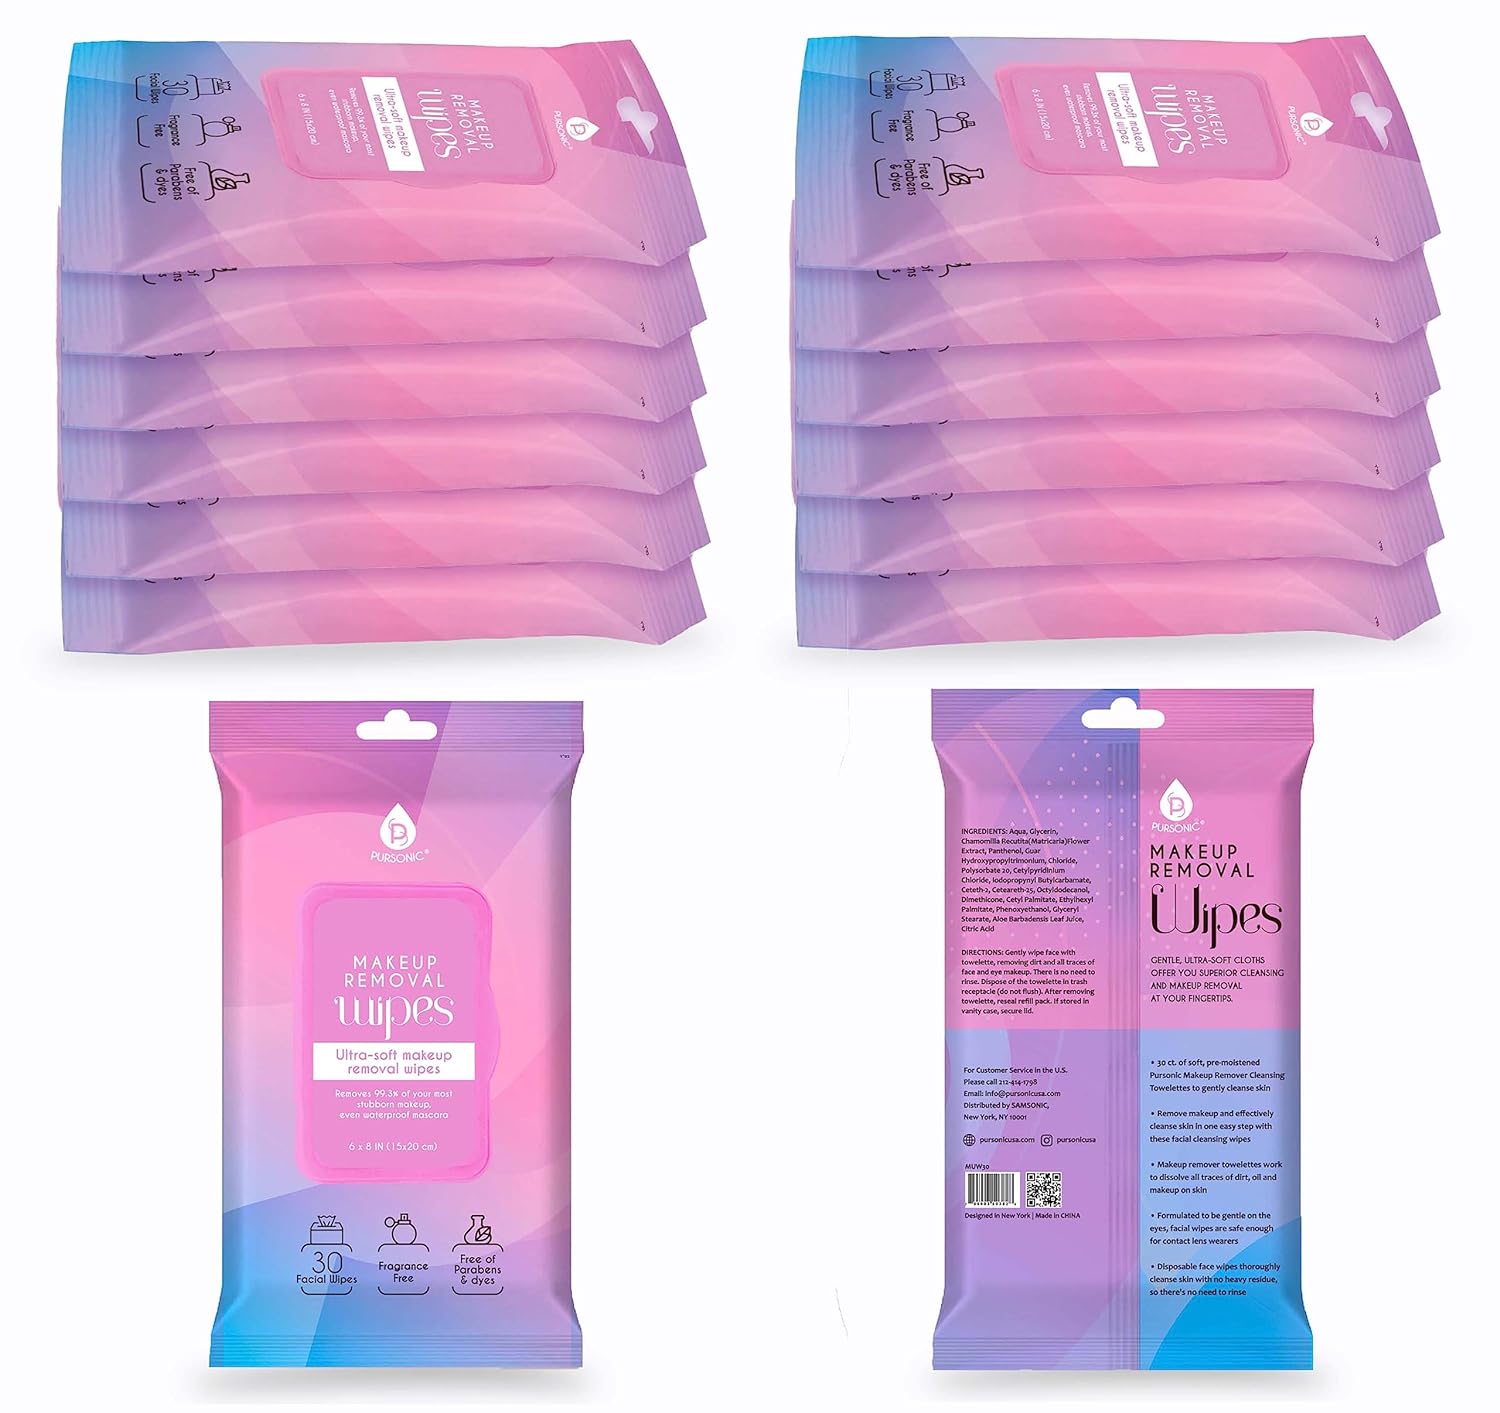 Pursonic-Makeup-Removal-Wipes-12-444